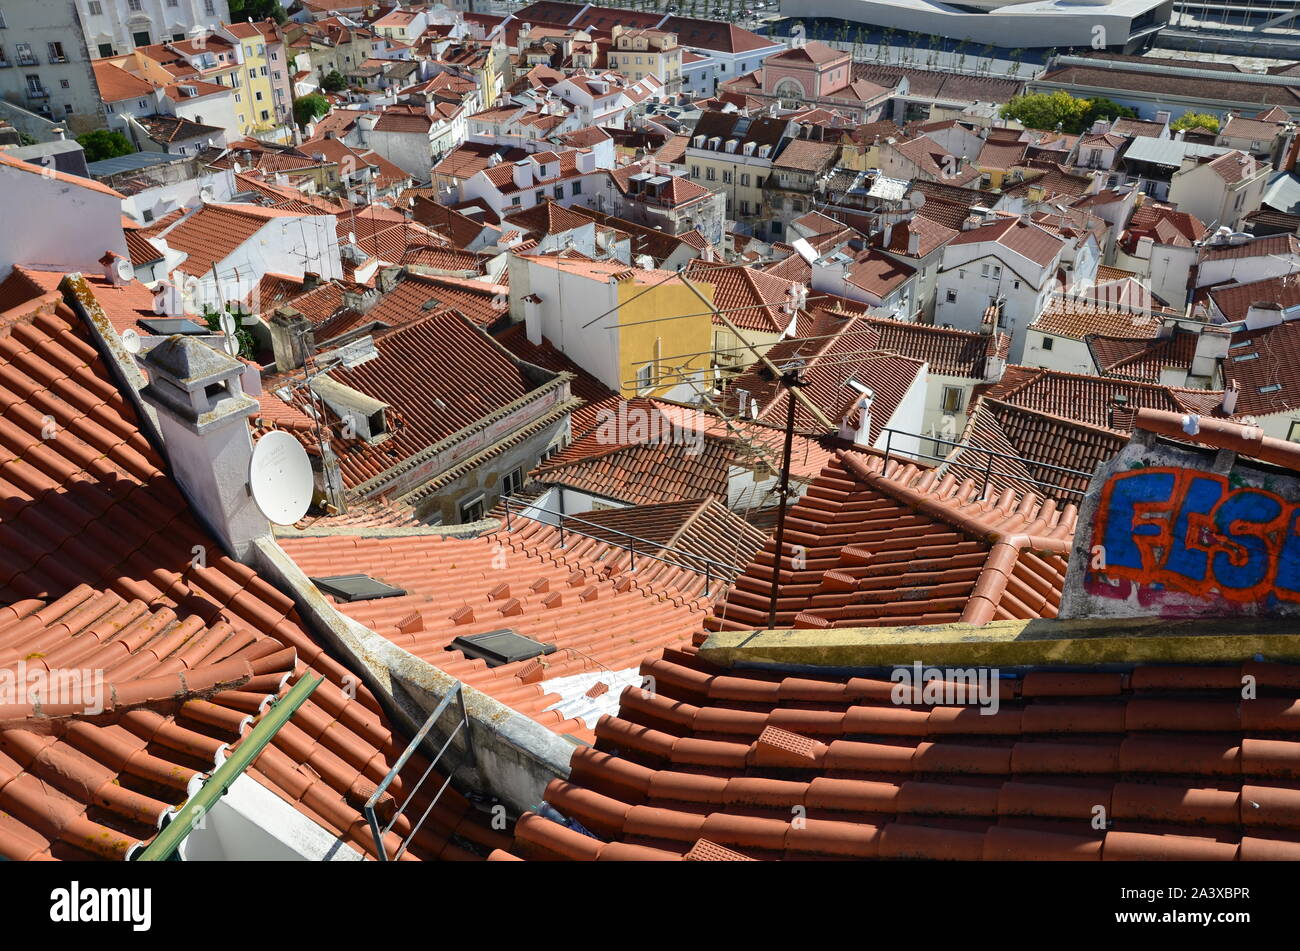 The view of the city rooftops in Portugal Stock Photo